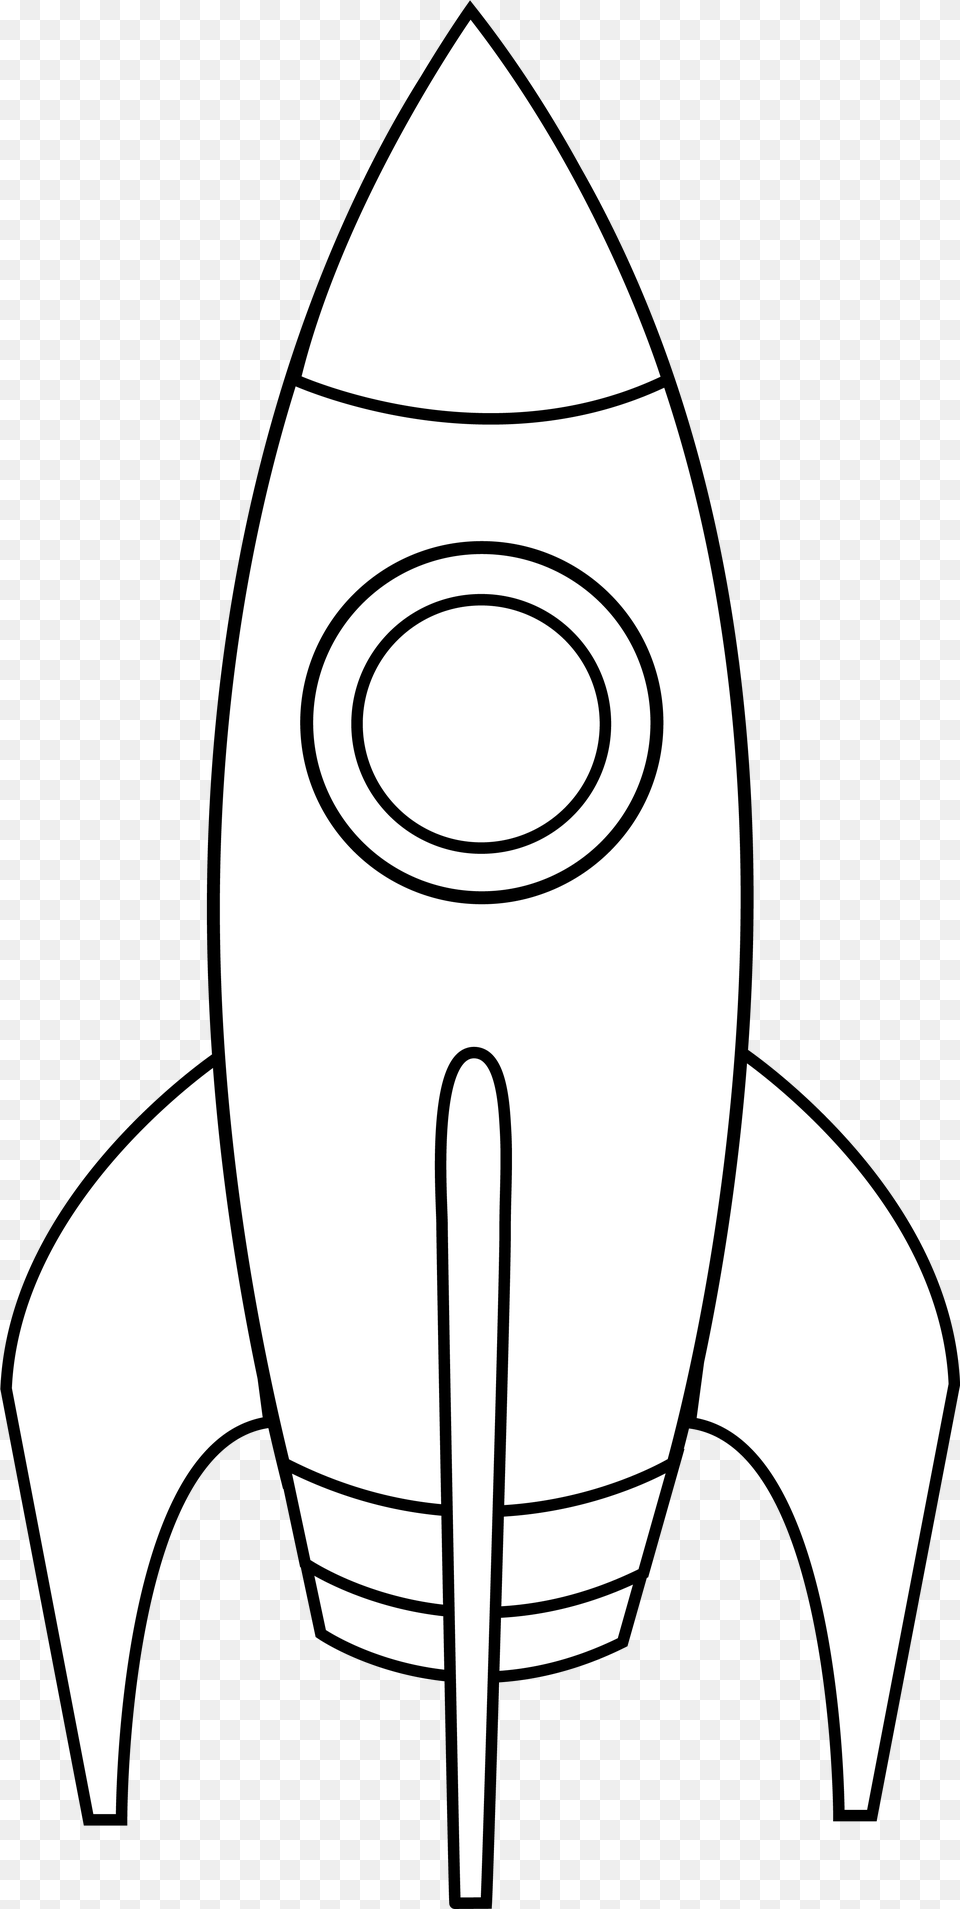 Spaceship Picture Download Space Ship Clip Art, Rocket, Weapon, Stencil Png Image